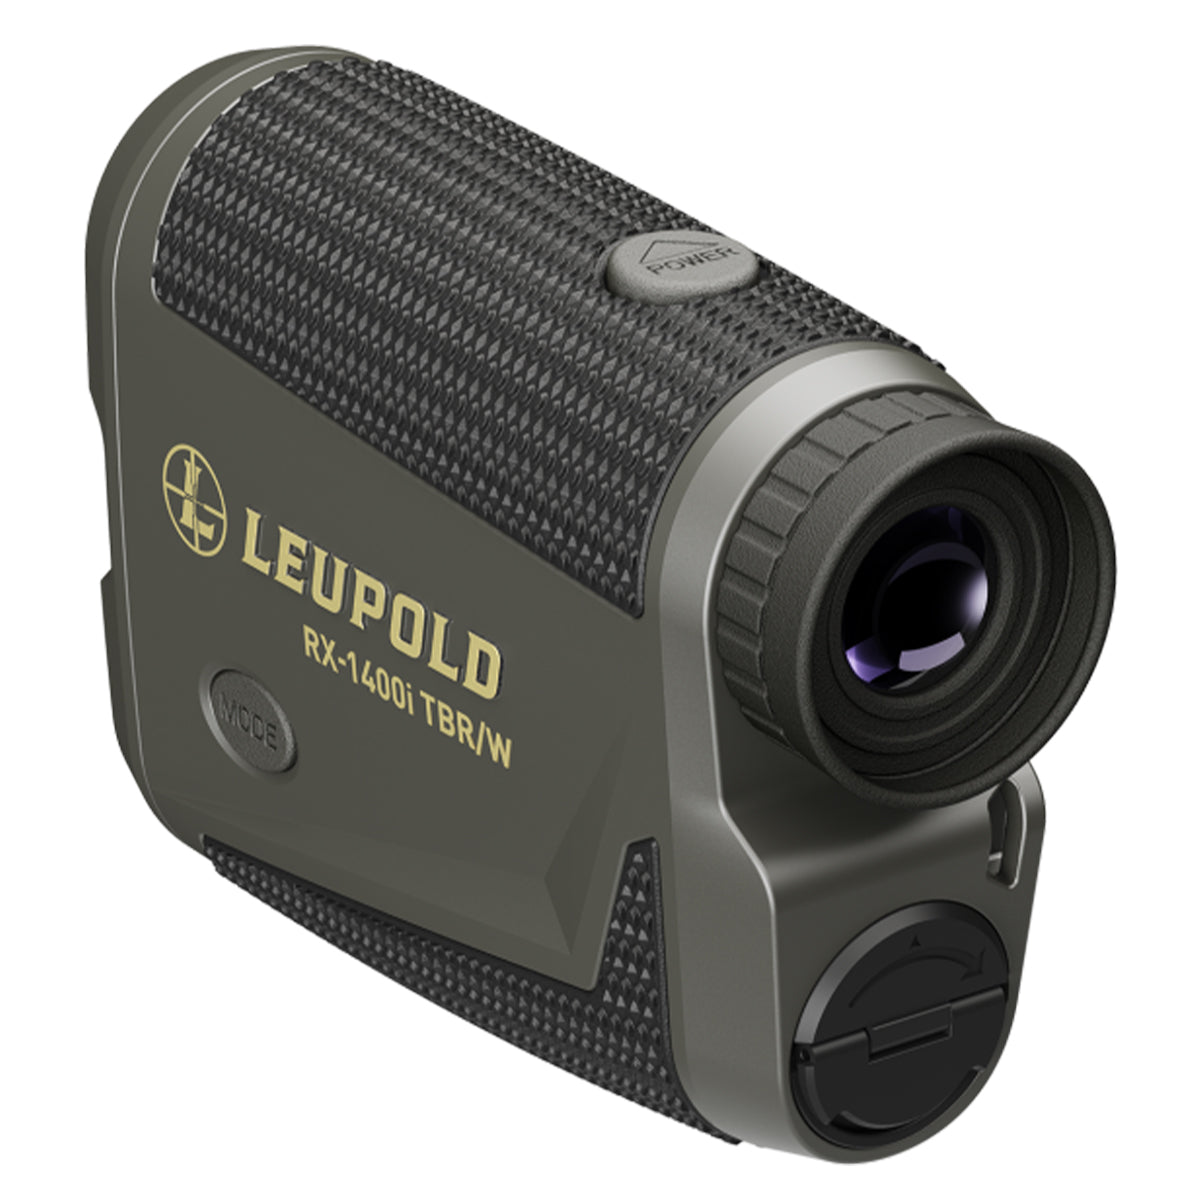 Leupold RX-1400i TBR/W with DNA (179640) in  by GOHUNT | Leupold - GOHUNT Shop